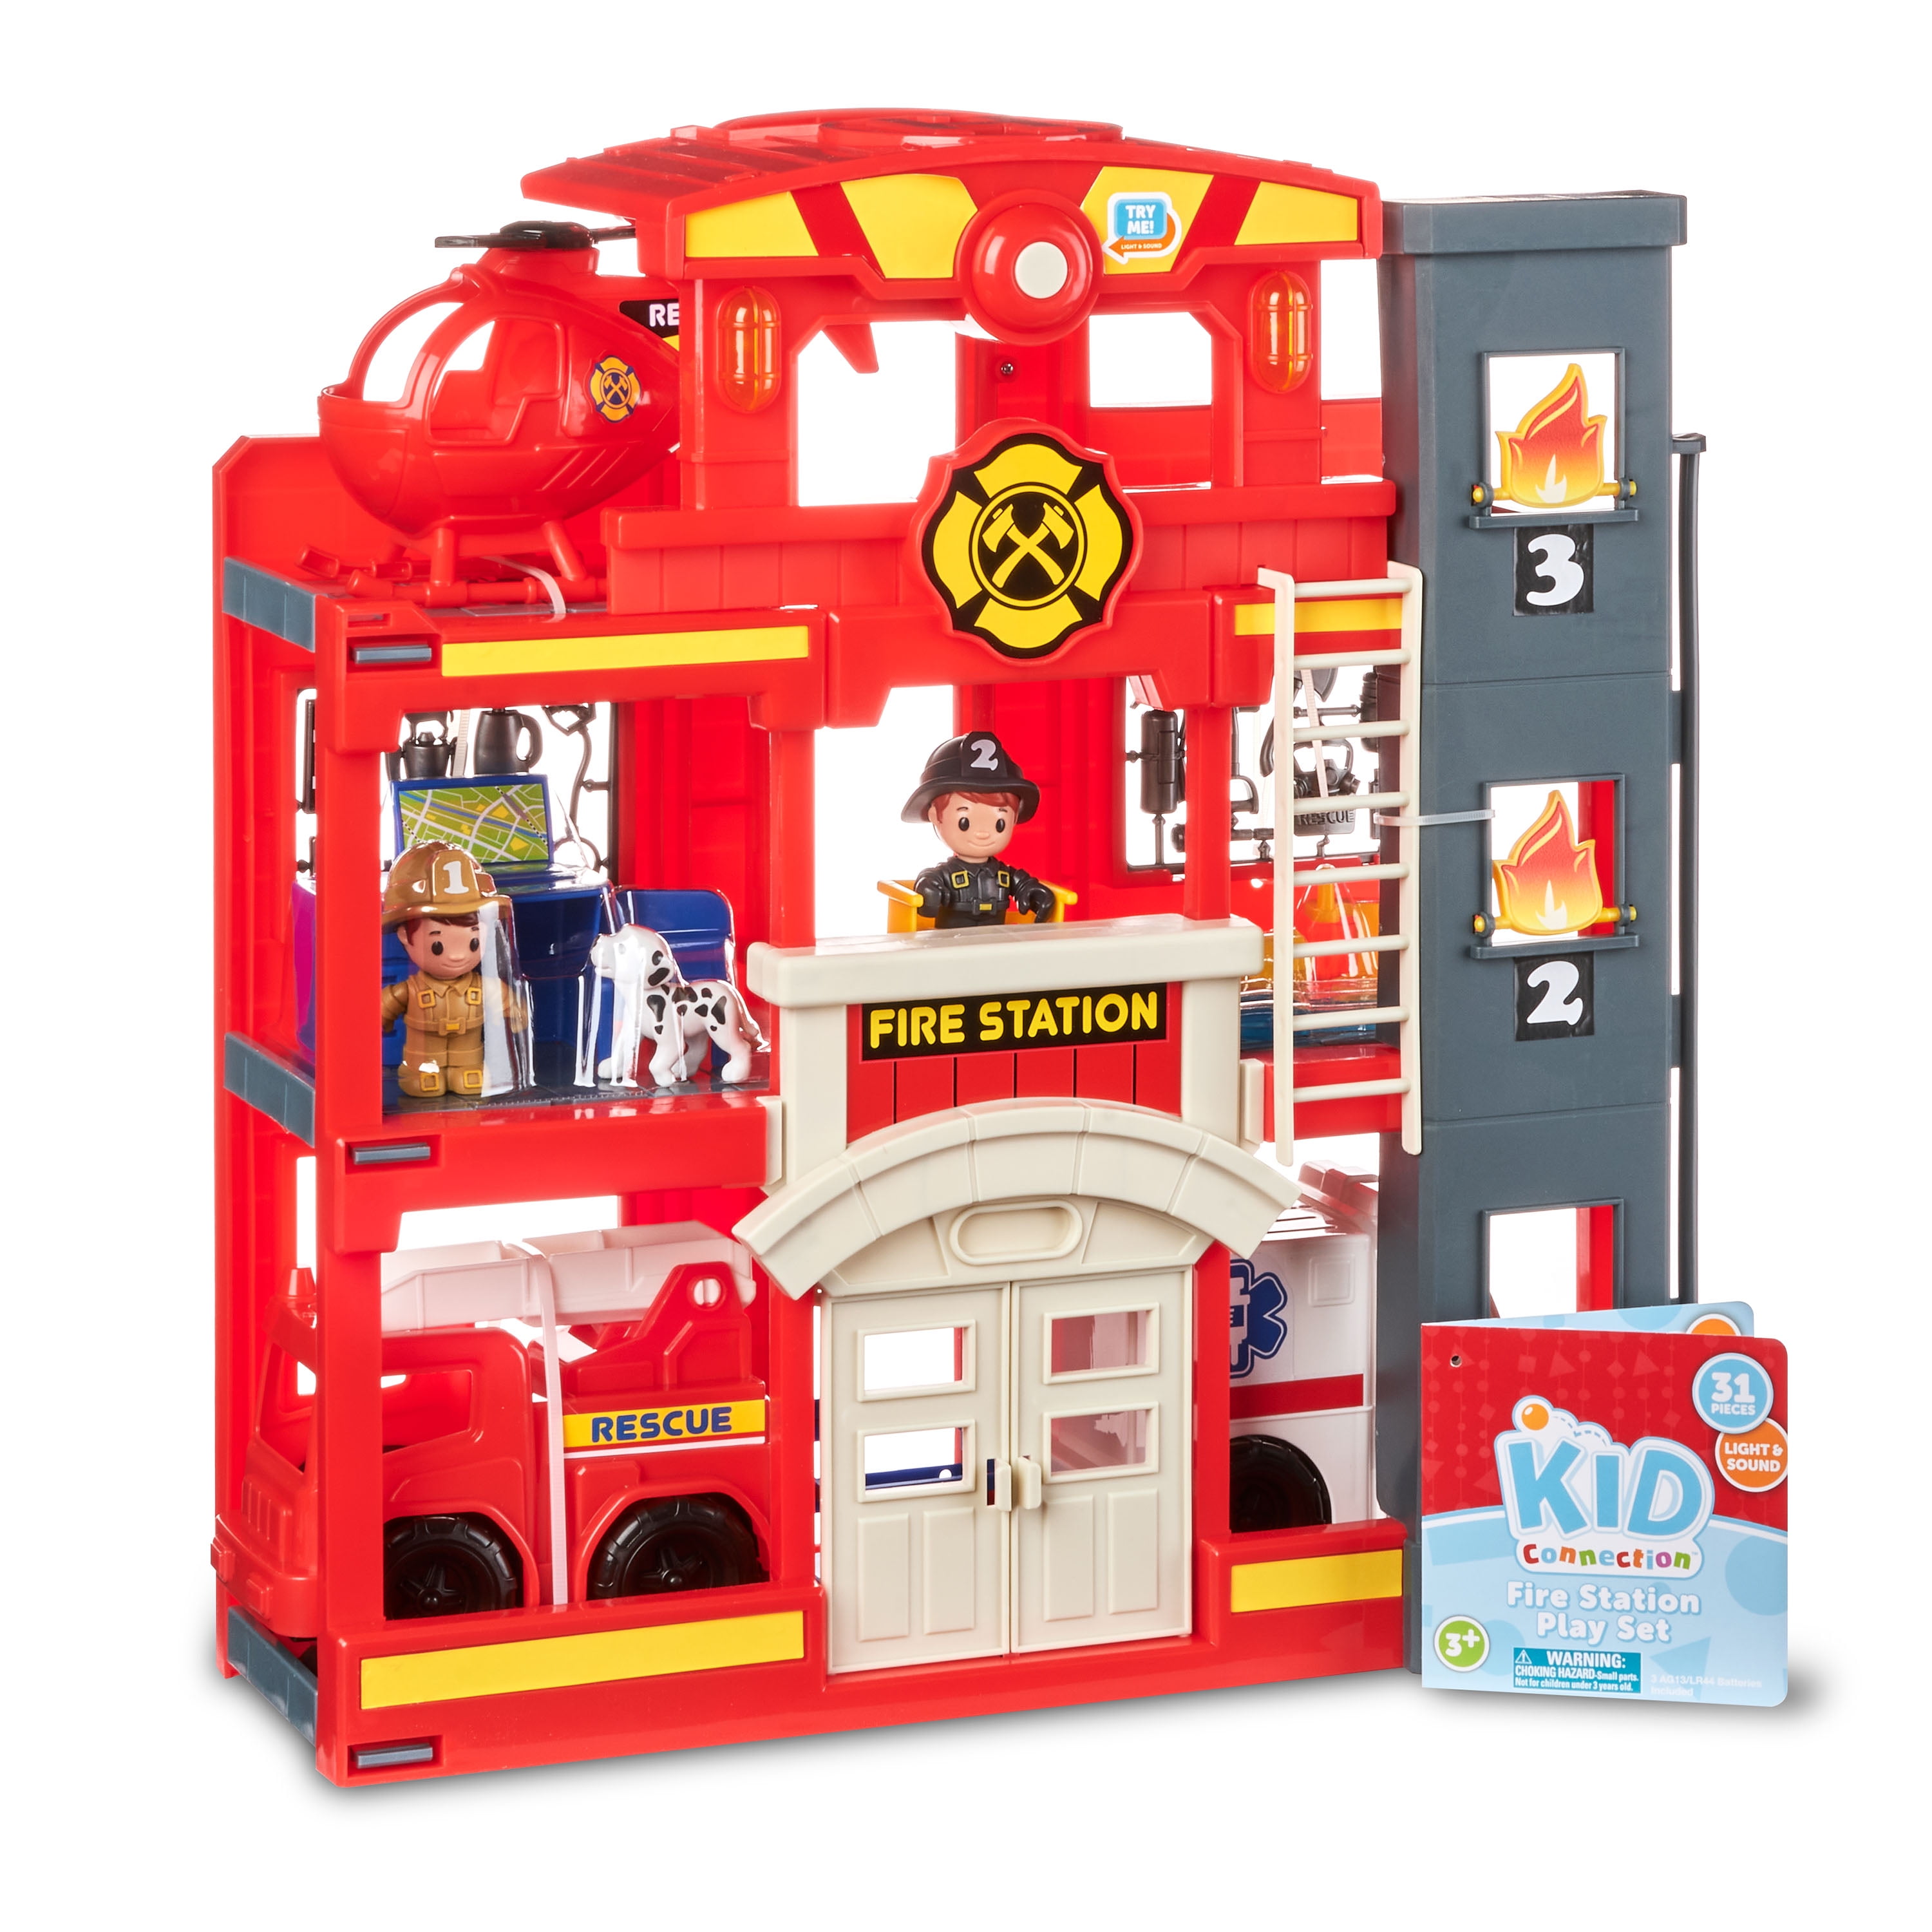 Kid Connection Fire Station Fire Vehicle Playset (31 Pieces) - Walmart.com